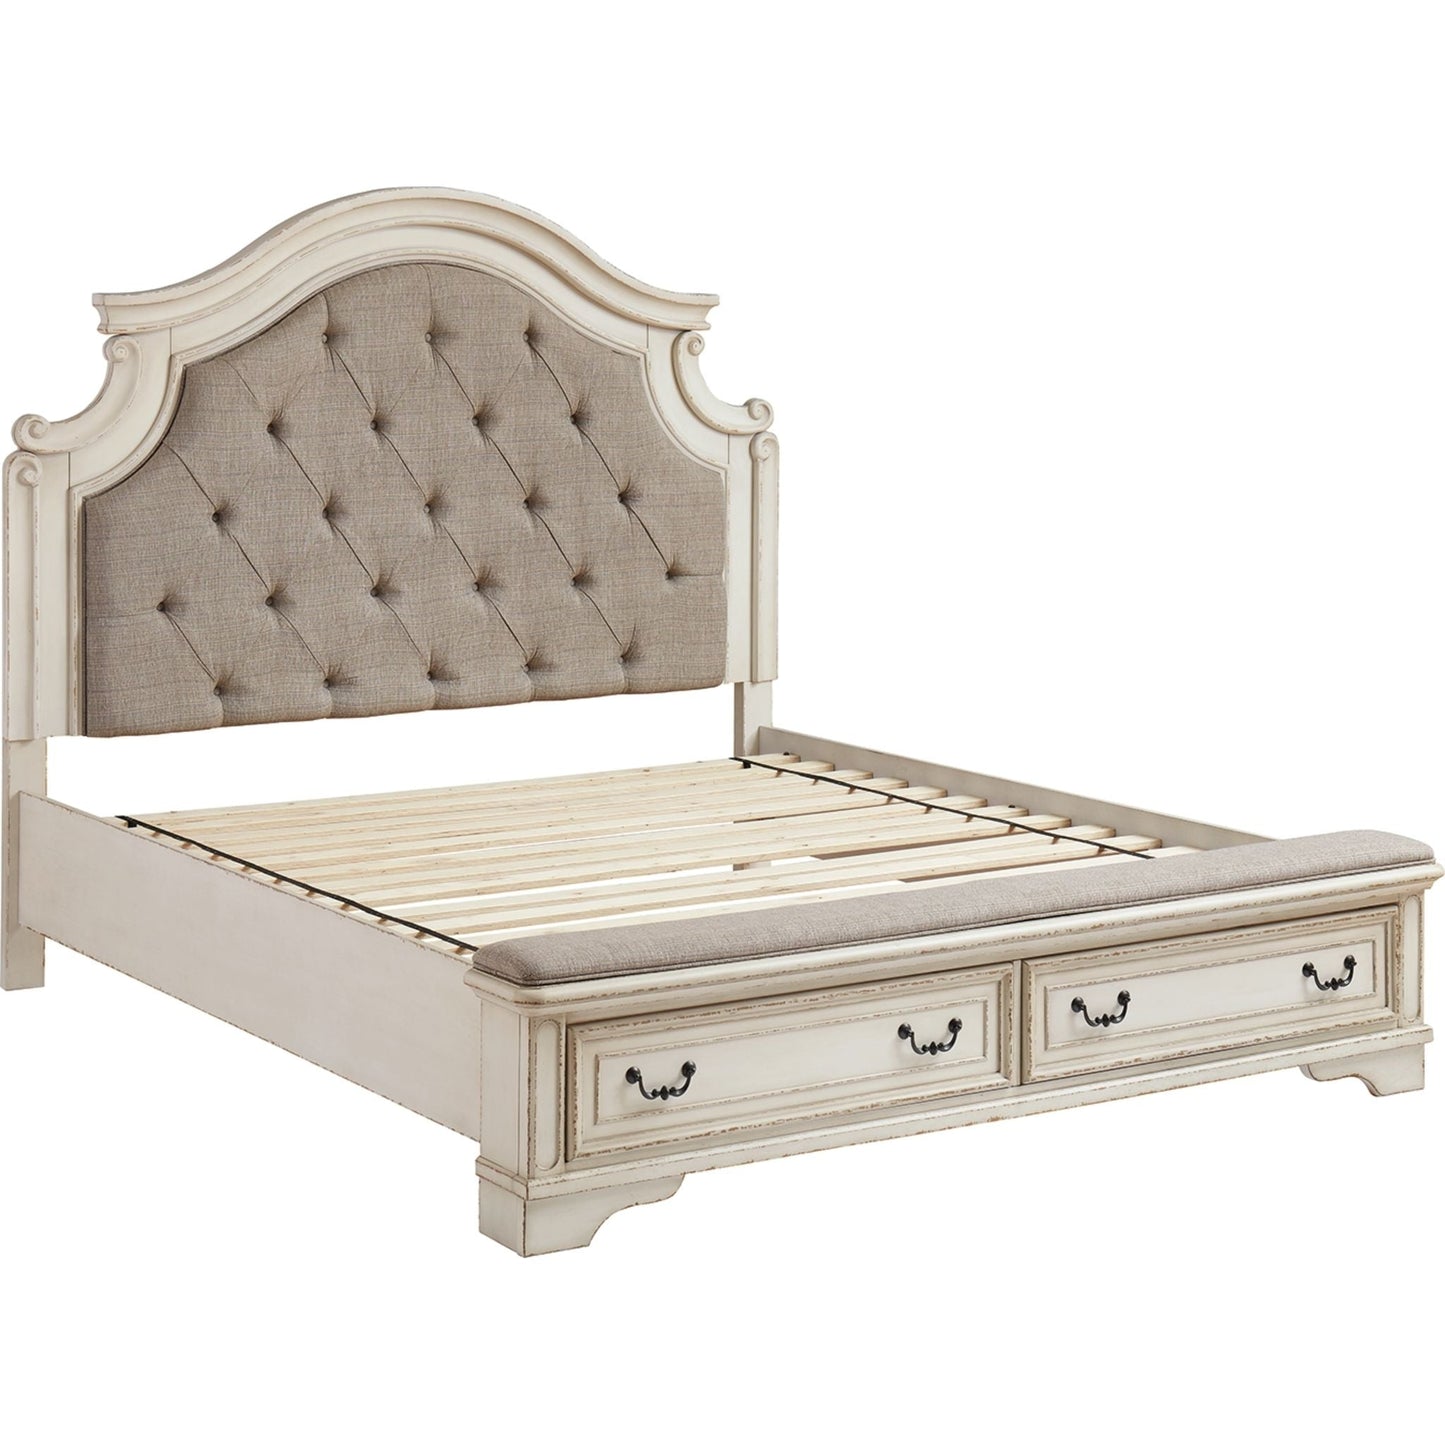 Realyn Queen Bed - Two-tone